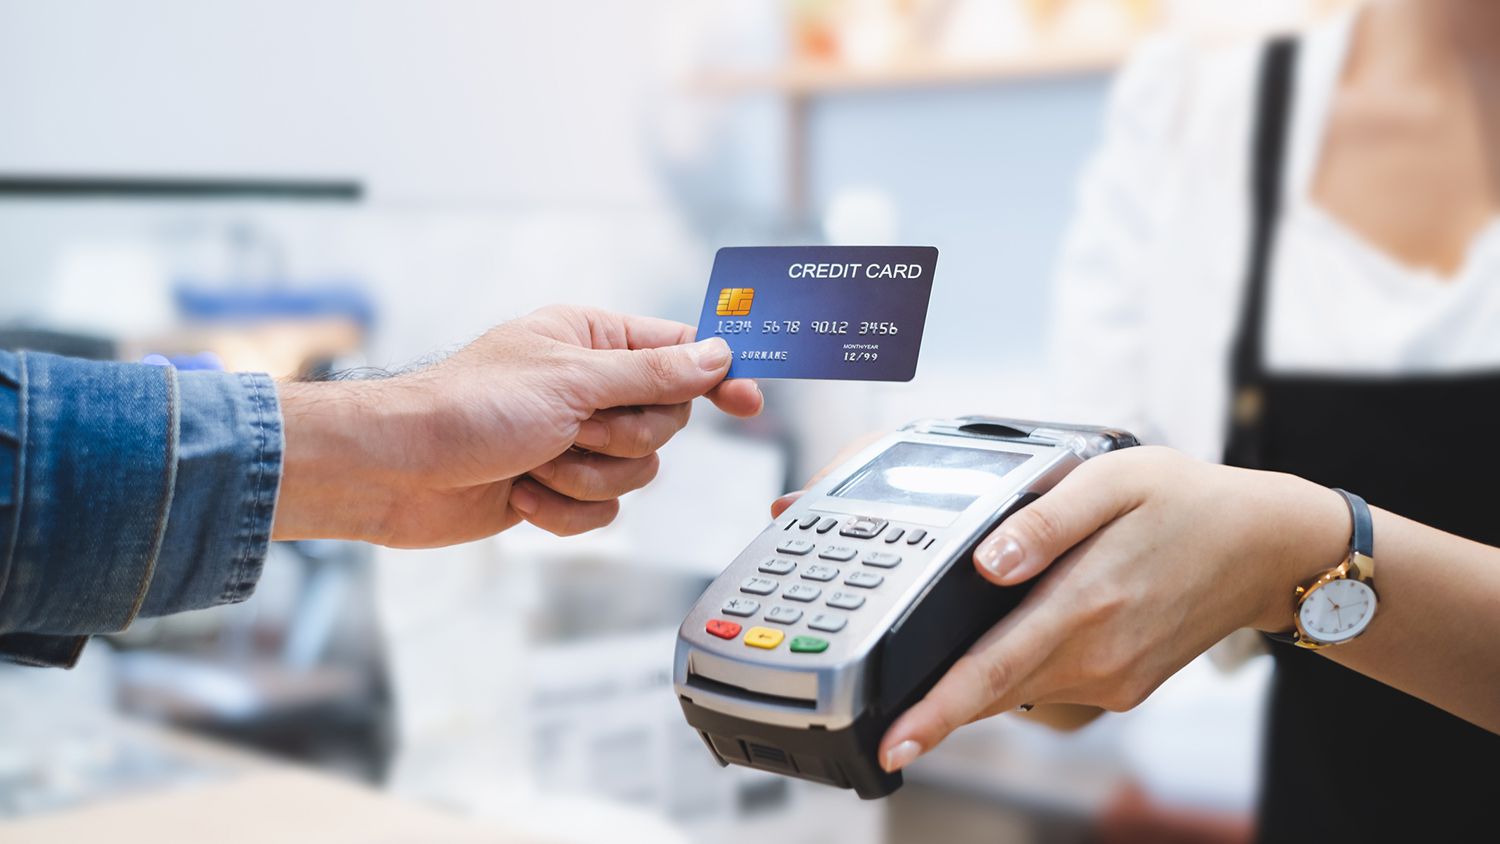 credit card bill payments